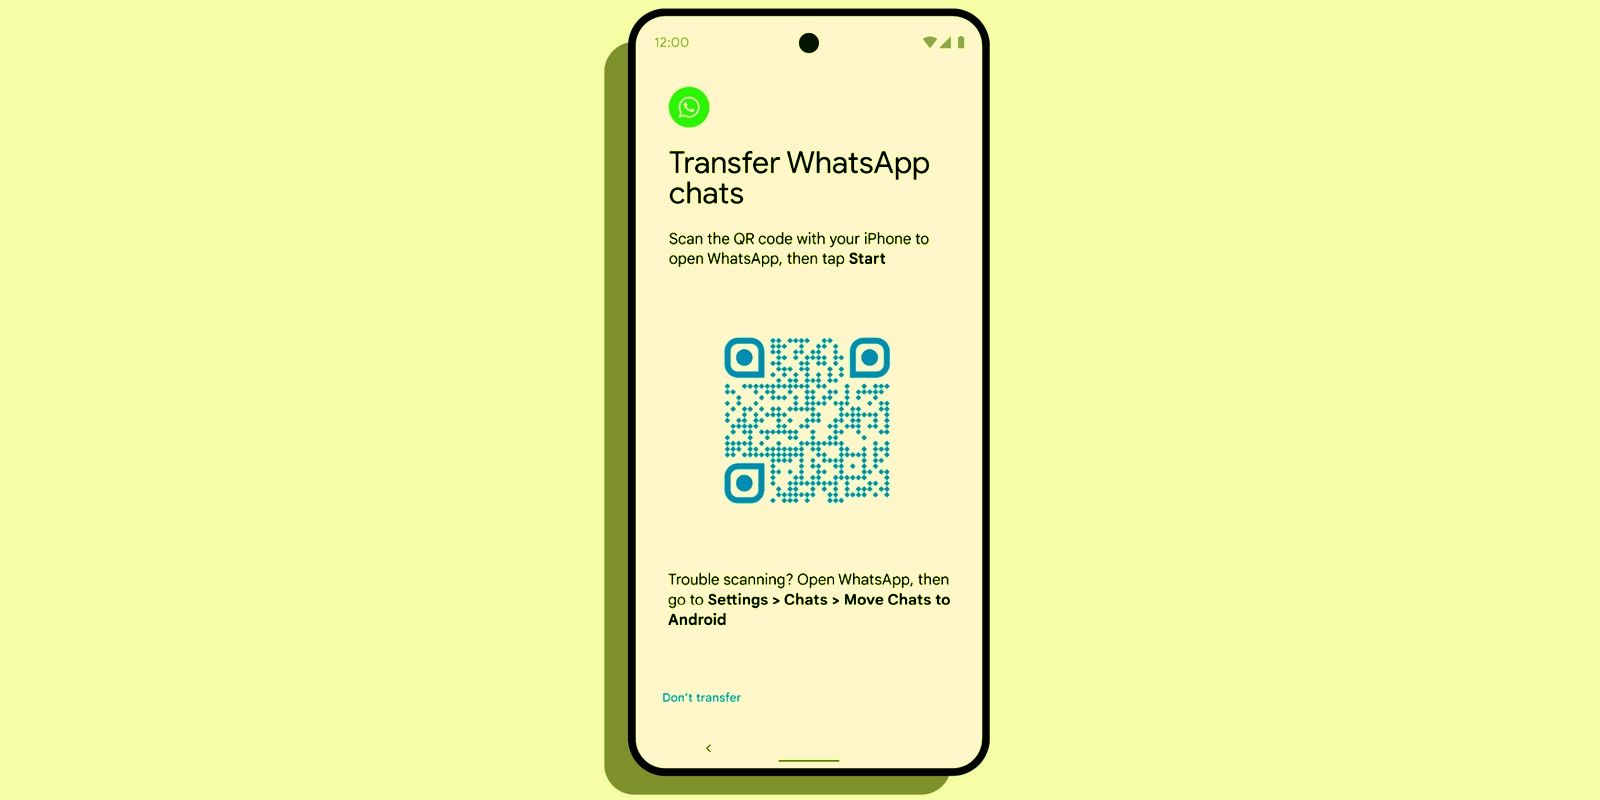 WhatsApp iPhone to Android data transfer tool